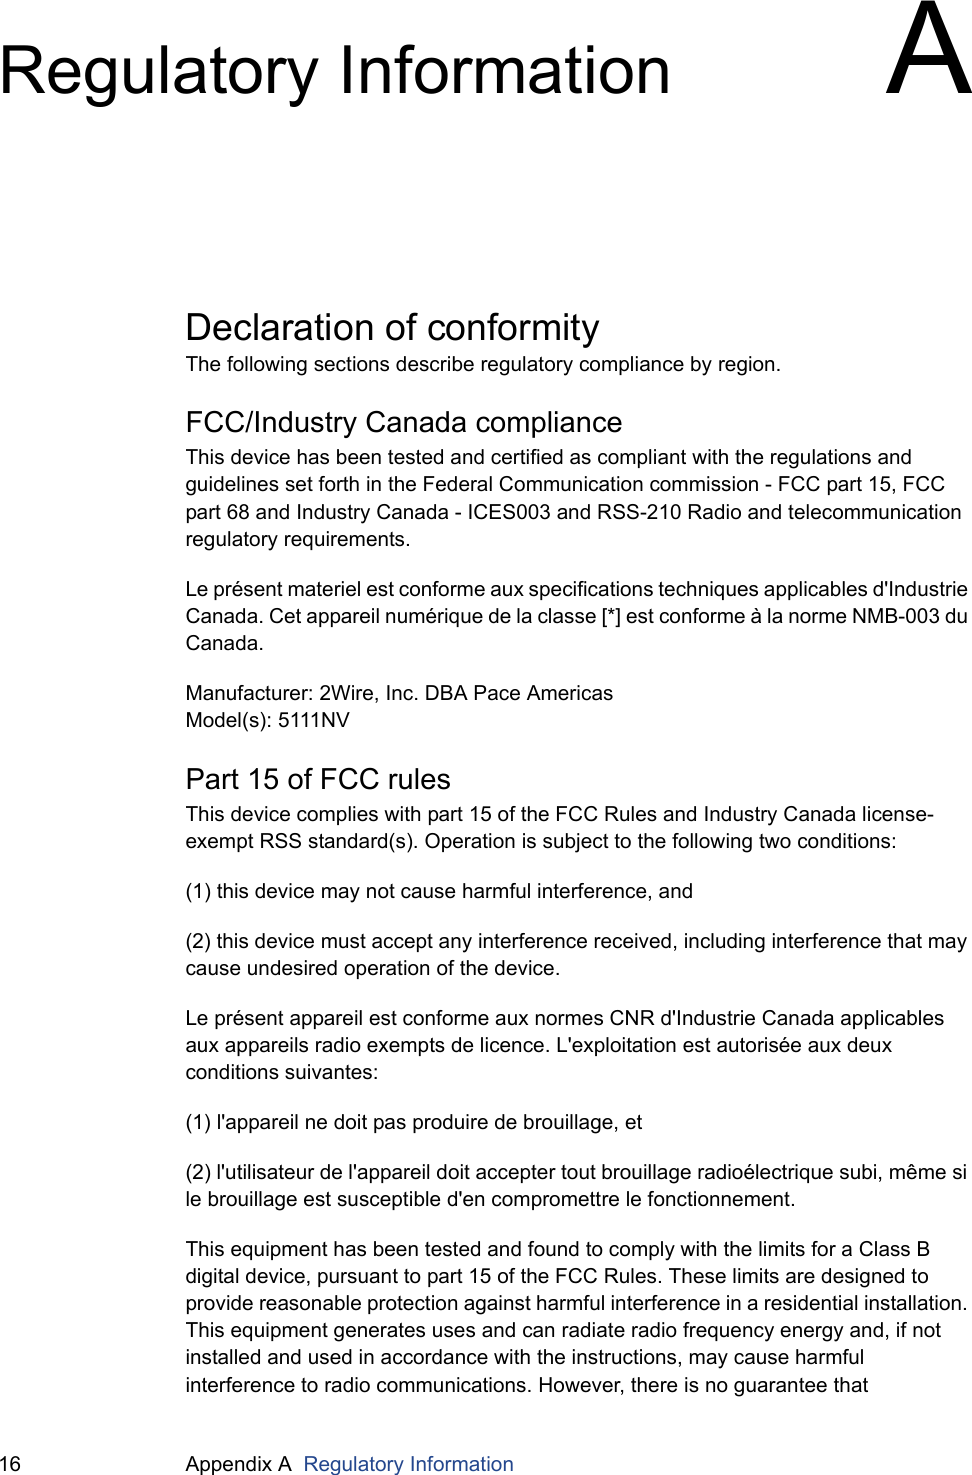 16 Appendix A  Regulatory InformationRegulatory Information ADeclaration of conformityThe following sections describe regulatory compliance by region.FCC/Industry Canada complianceThis device has been tested and certified as compliant with the regulations and guidelines set forth in the Federal Communication commission - FCC part 15, FCC part 68 and Industry Canada - ICES003 and RSS-210 Radio and telecommunication regulatory requirements.Le présent materiel est conforme aux specifications techniques applicables d&apos;Industrie Canada. Cet appareil numérique de la classe [*] est conforme à la norme NMB-003 du Canada.Manufacturer: 2Wire, Inc. DBA Pace AmericasModel(s): 5111NVPart 15 of FCC rulesThis device complies with part 15 of the FCC Rules and Industry Canada license-exempt RSS standard(s). Operation is subject to the following two conditions: (1) this device may not cause harmful interference, and(2) this device must accept any interference received, including interference that may cause undesired operation of the device.Le présent appareil est conforme aux normes CNR d&apos;Industrie Canada applicables aux appareils radio exempts de licence. L&apos;exploitation est autorisée aux deux conditions suivantes:(1) l&apos;appareil ne doit pas produire de brouillage, et(2) l&apos;utilisateur de l&apos;appareil doit accepter tout brouillage radioélectrique subi, même si le brouillage est susceptible d&apos;en compromettre le fonctionnement.This equipment has been tested and found to comply with the limits for a Class B digital device, pursuant to part 15 of the FCC Rules. These limits are designed to provide reasonable protection against harmful interference in a residential installation. This equipment generates uses and can radiate radio frequency energy and, if not installed and used in accordance with the instructions, may cause harmful interference to radio communications. However, there is no guarantee that 